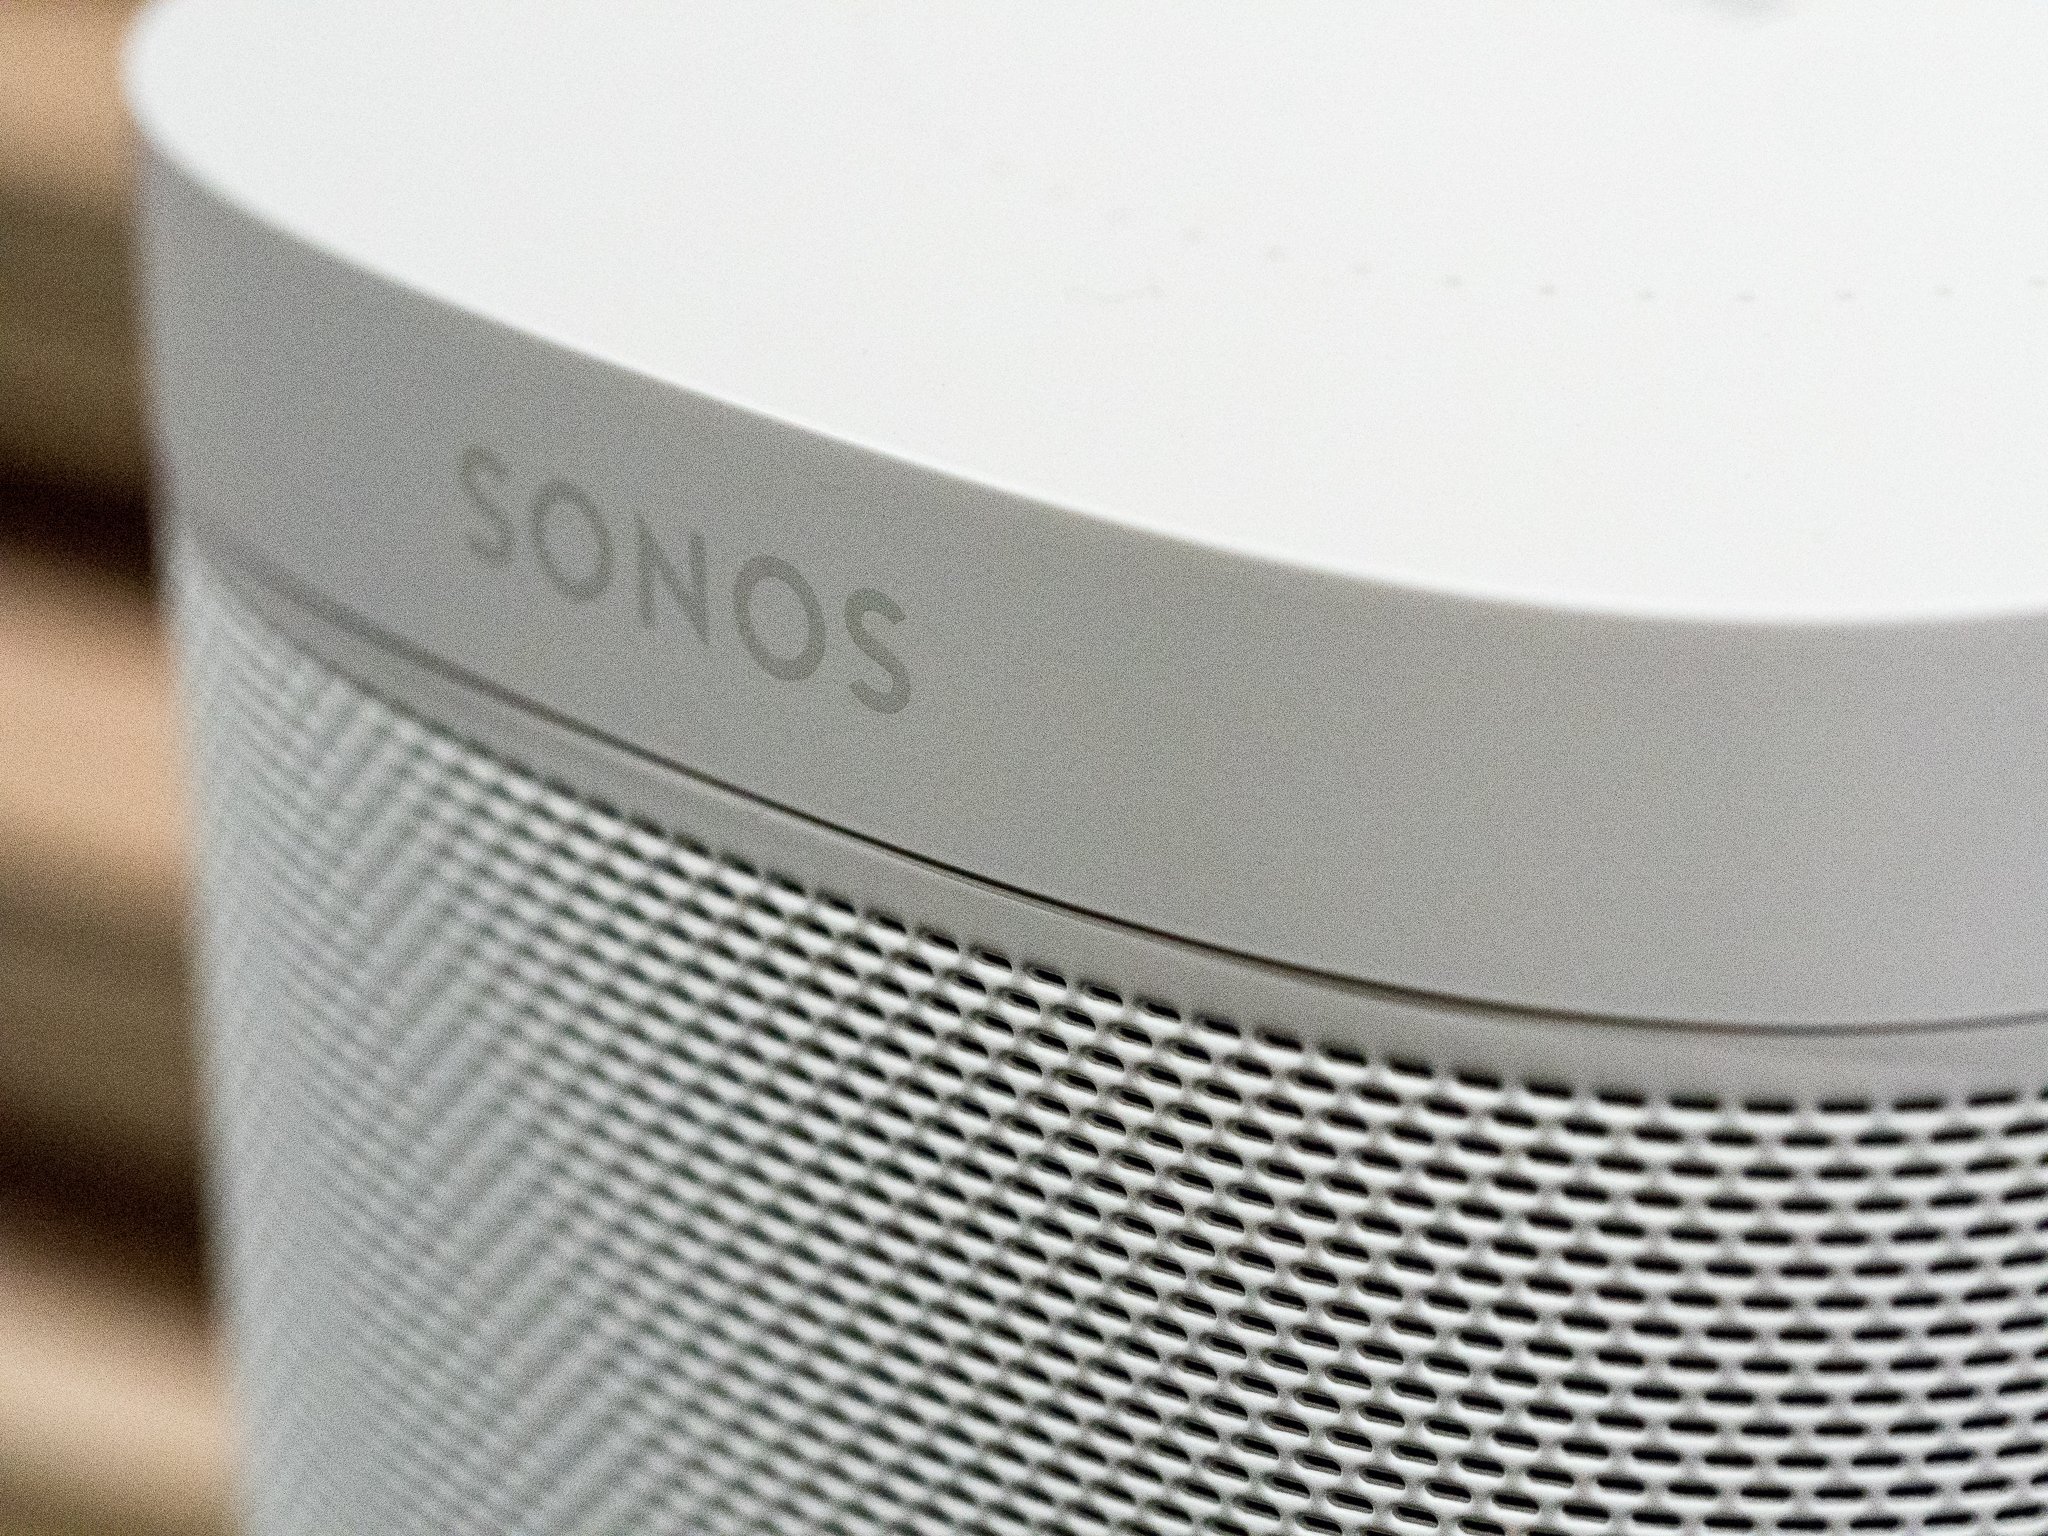 The lack Chromecast support on Sonos speakers in 2020 is | Android Central